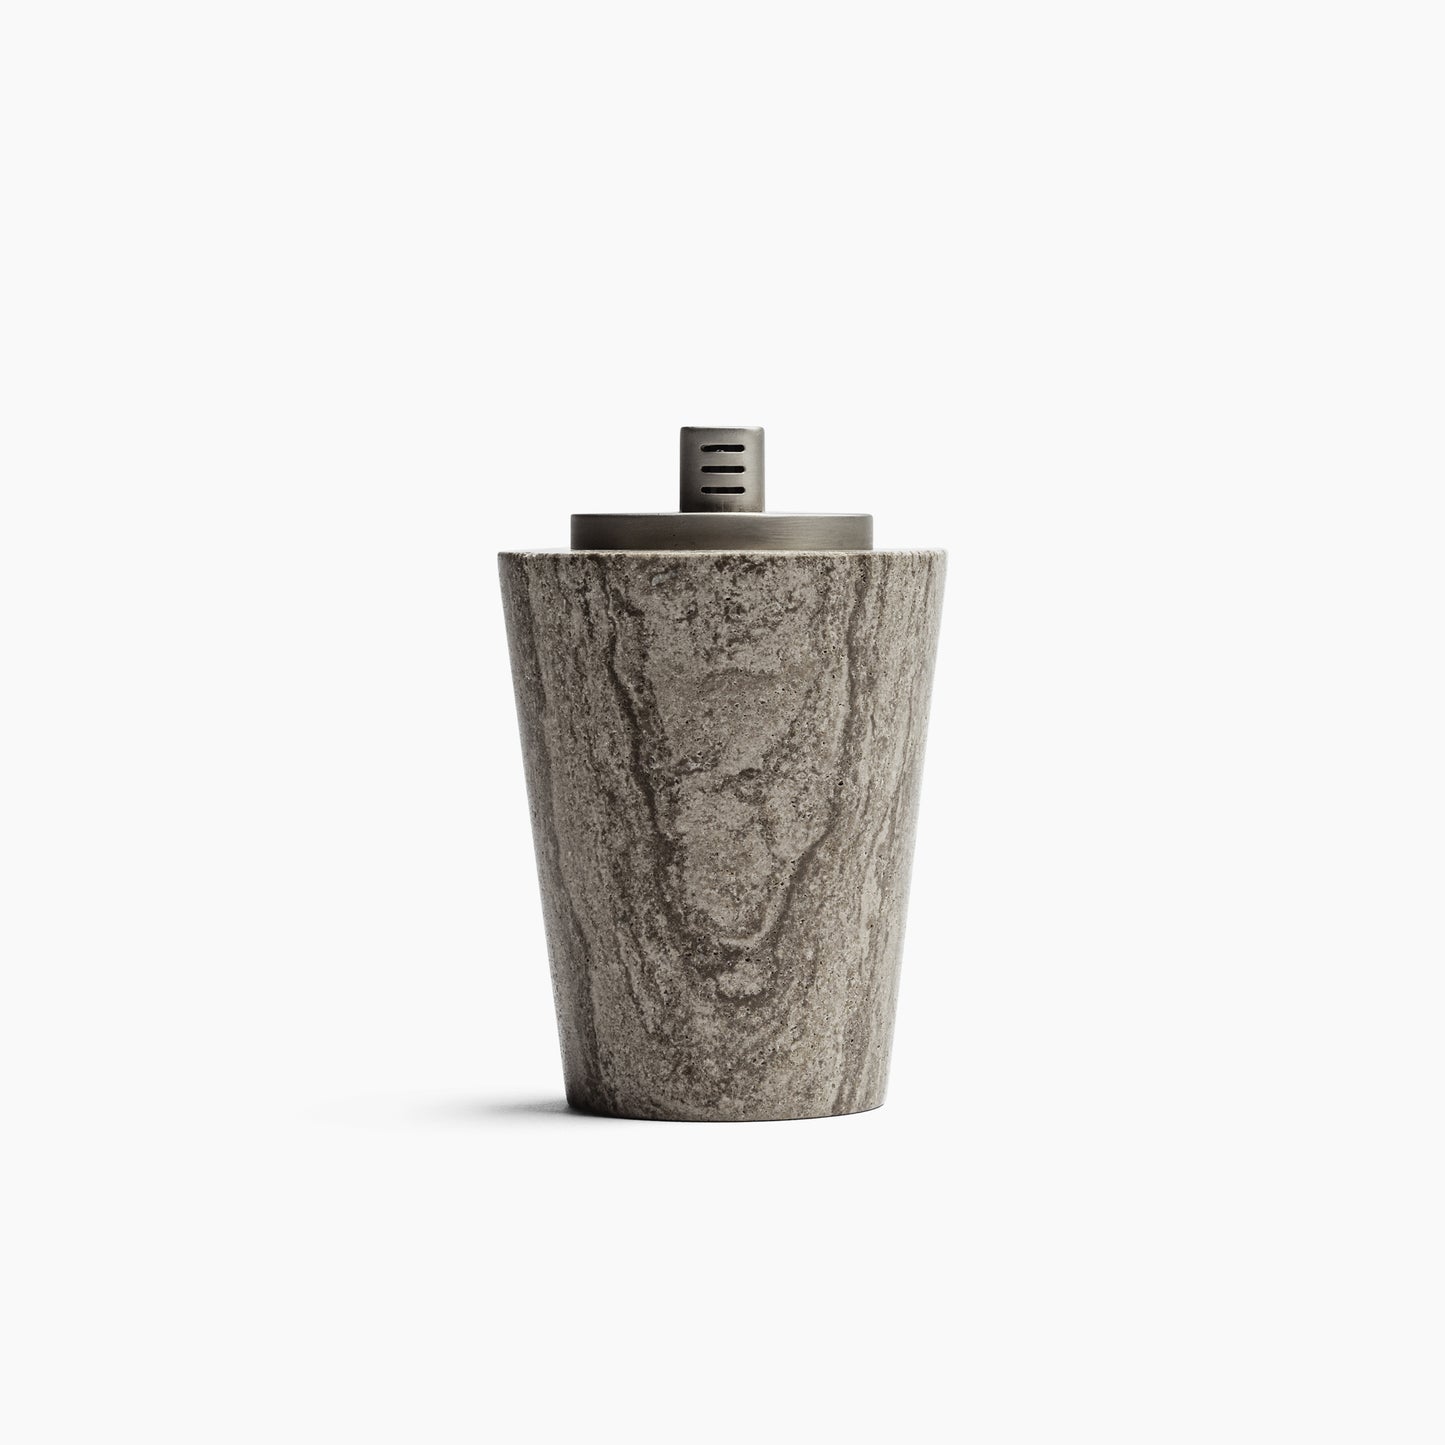 TABLE LIGHTER IN GREY ATHENS MARBLE WITH NICKEL INSERT